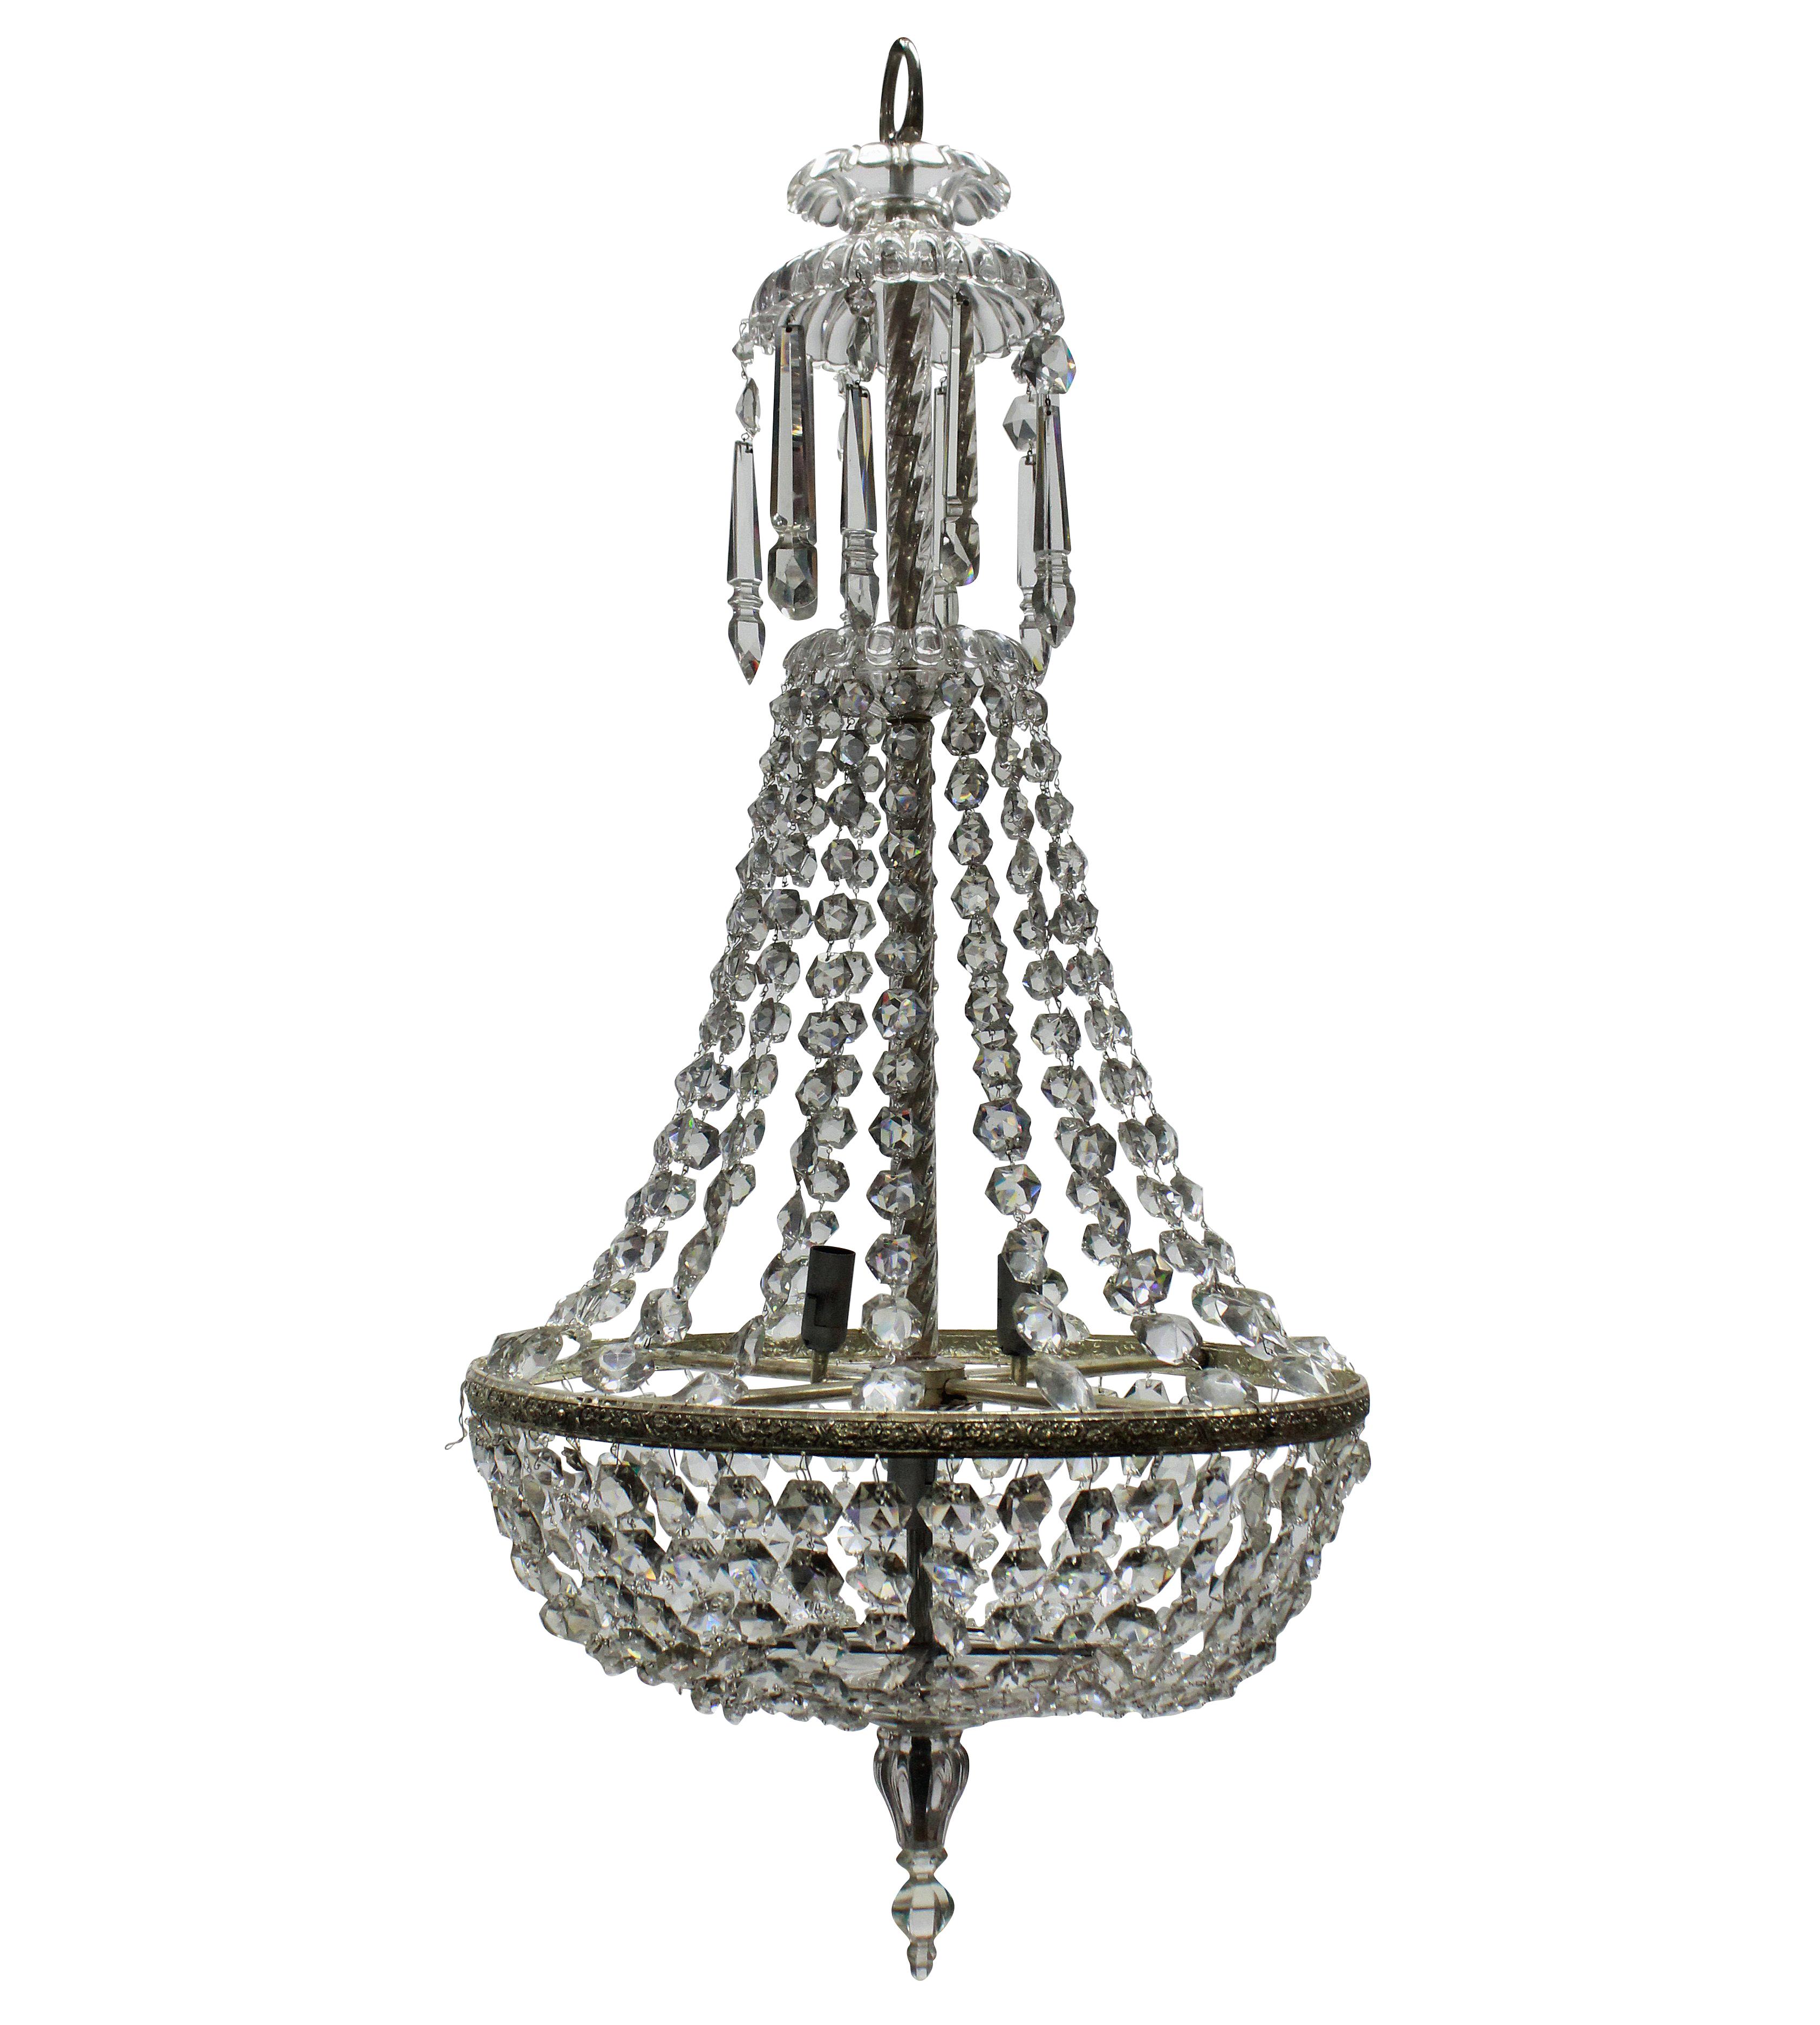 An English Edwardian tent and waterfall chandelier in cut glass with five internal lights.